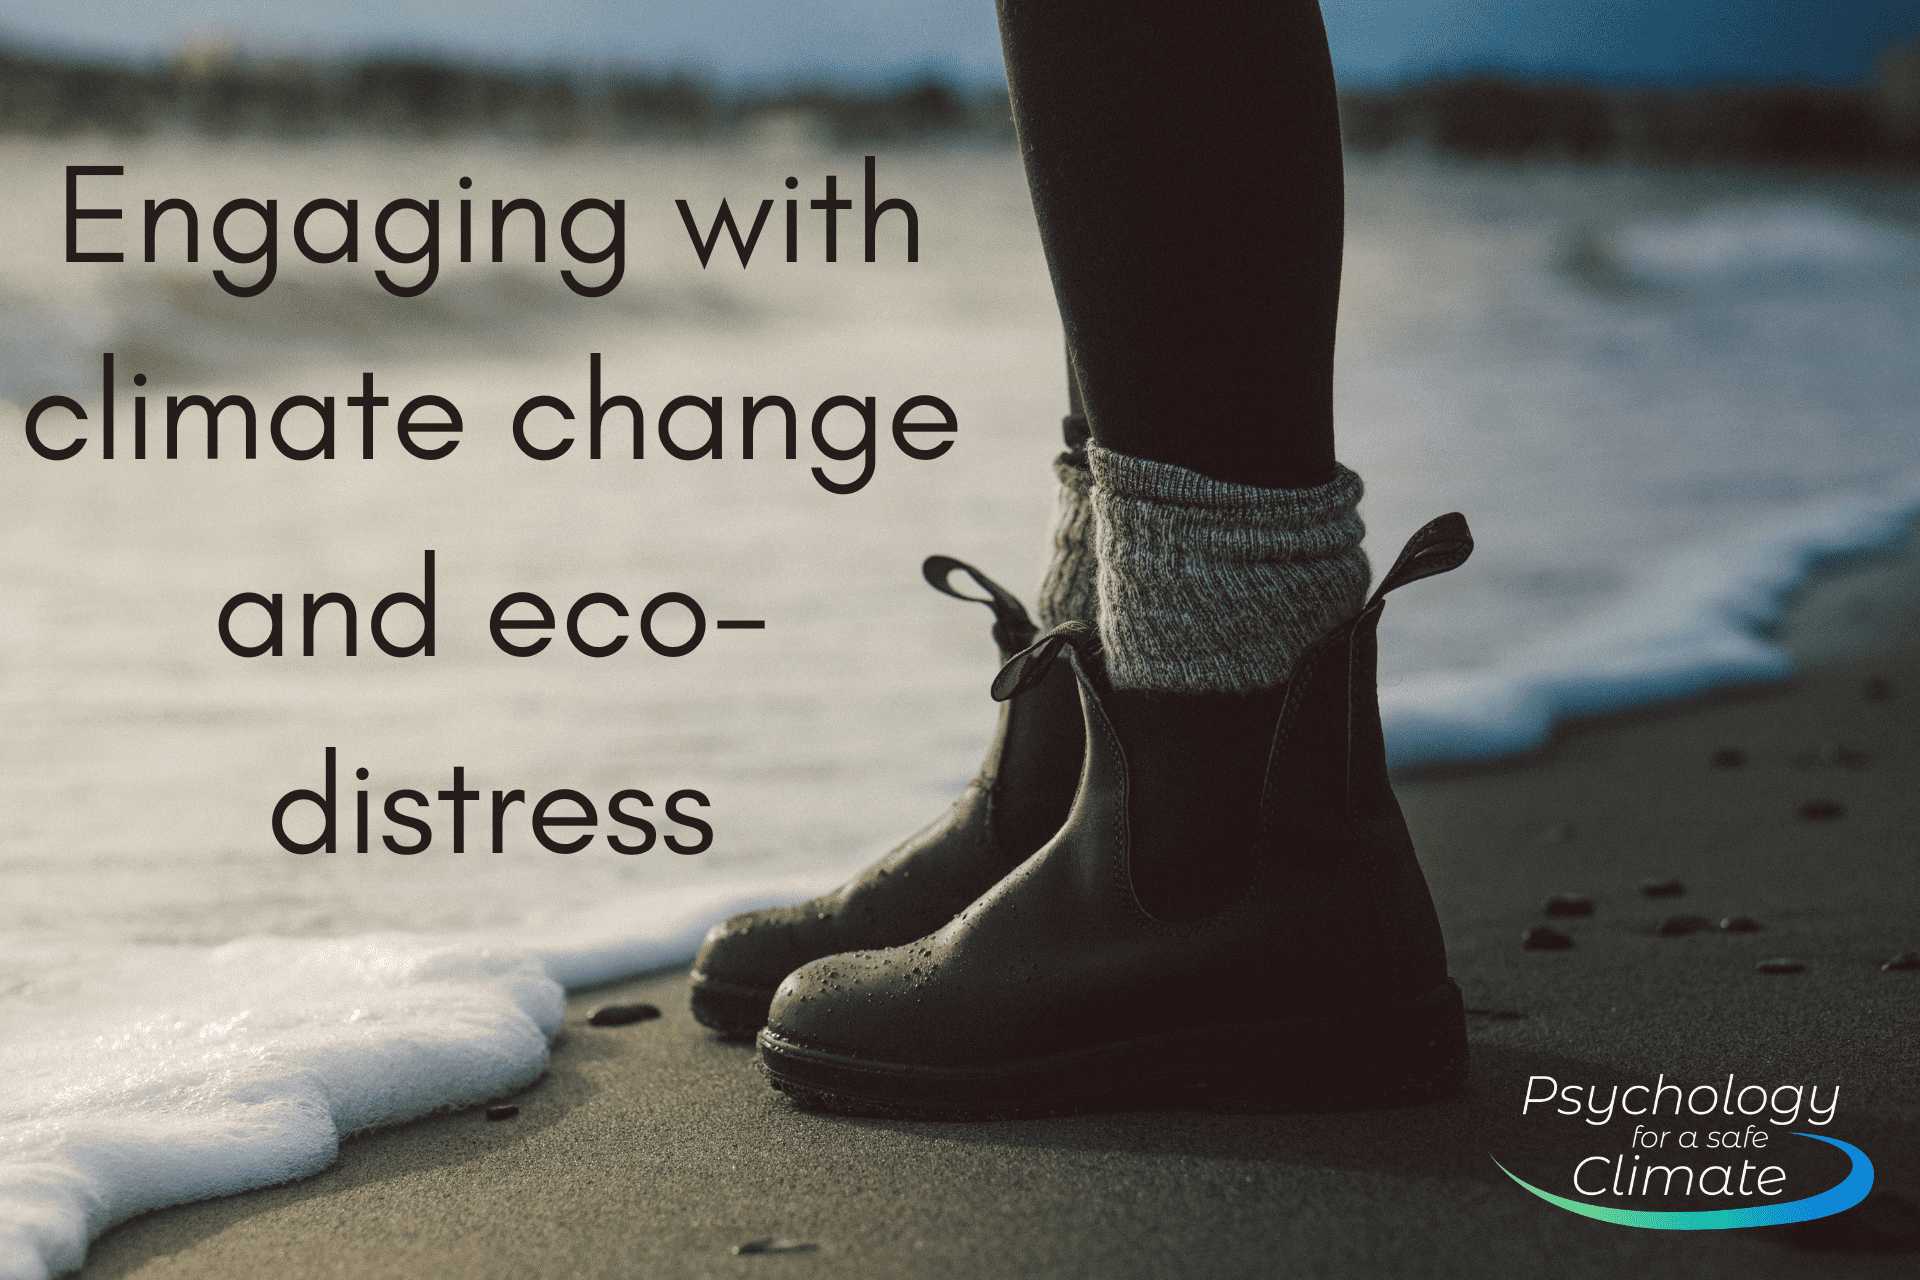 PD1: Engaging with climate change and eco-distress